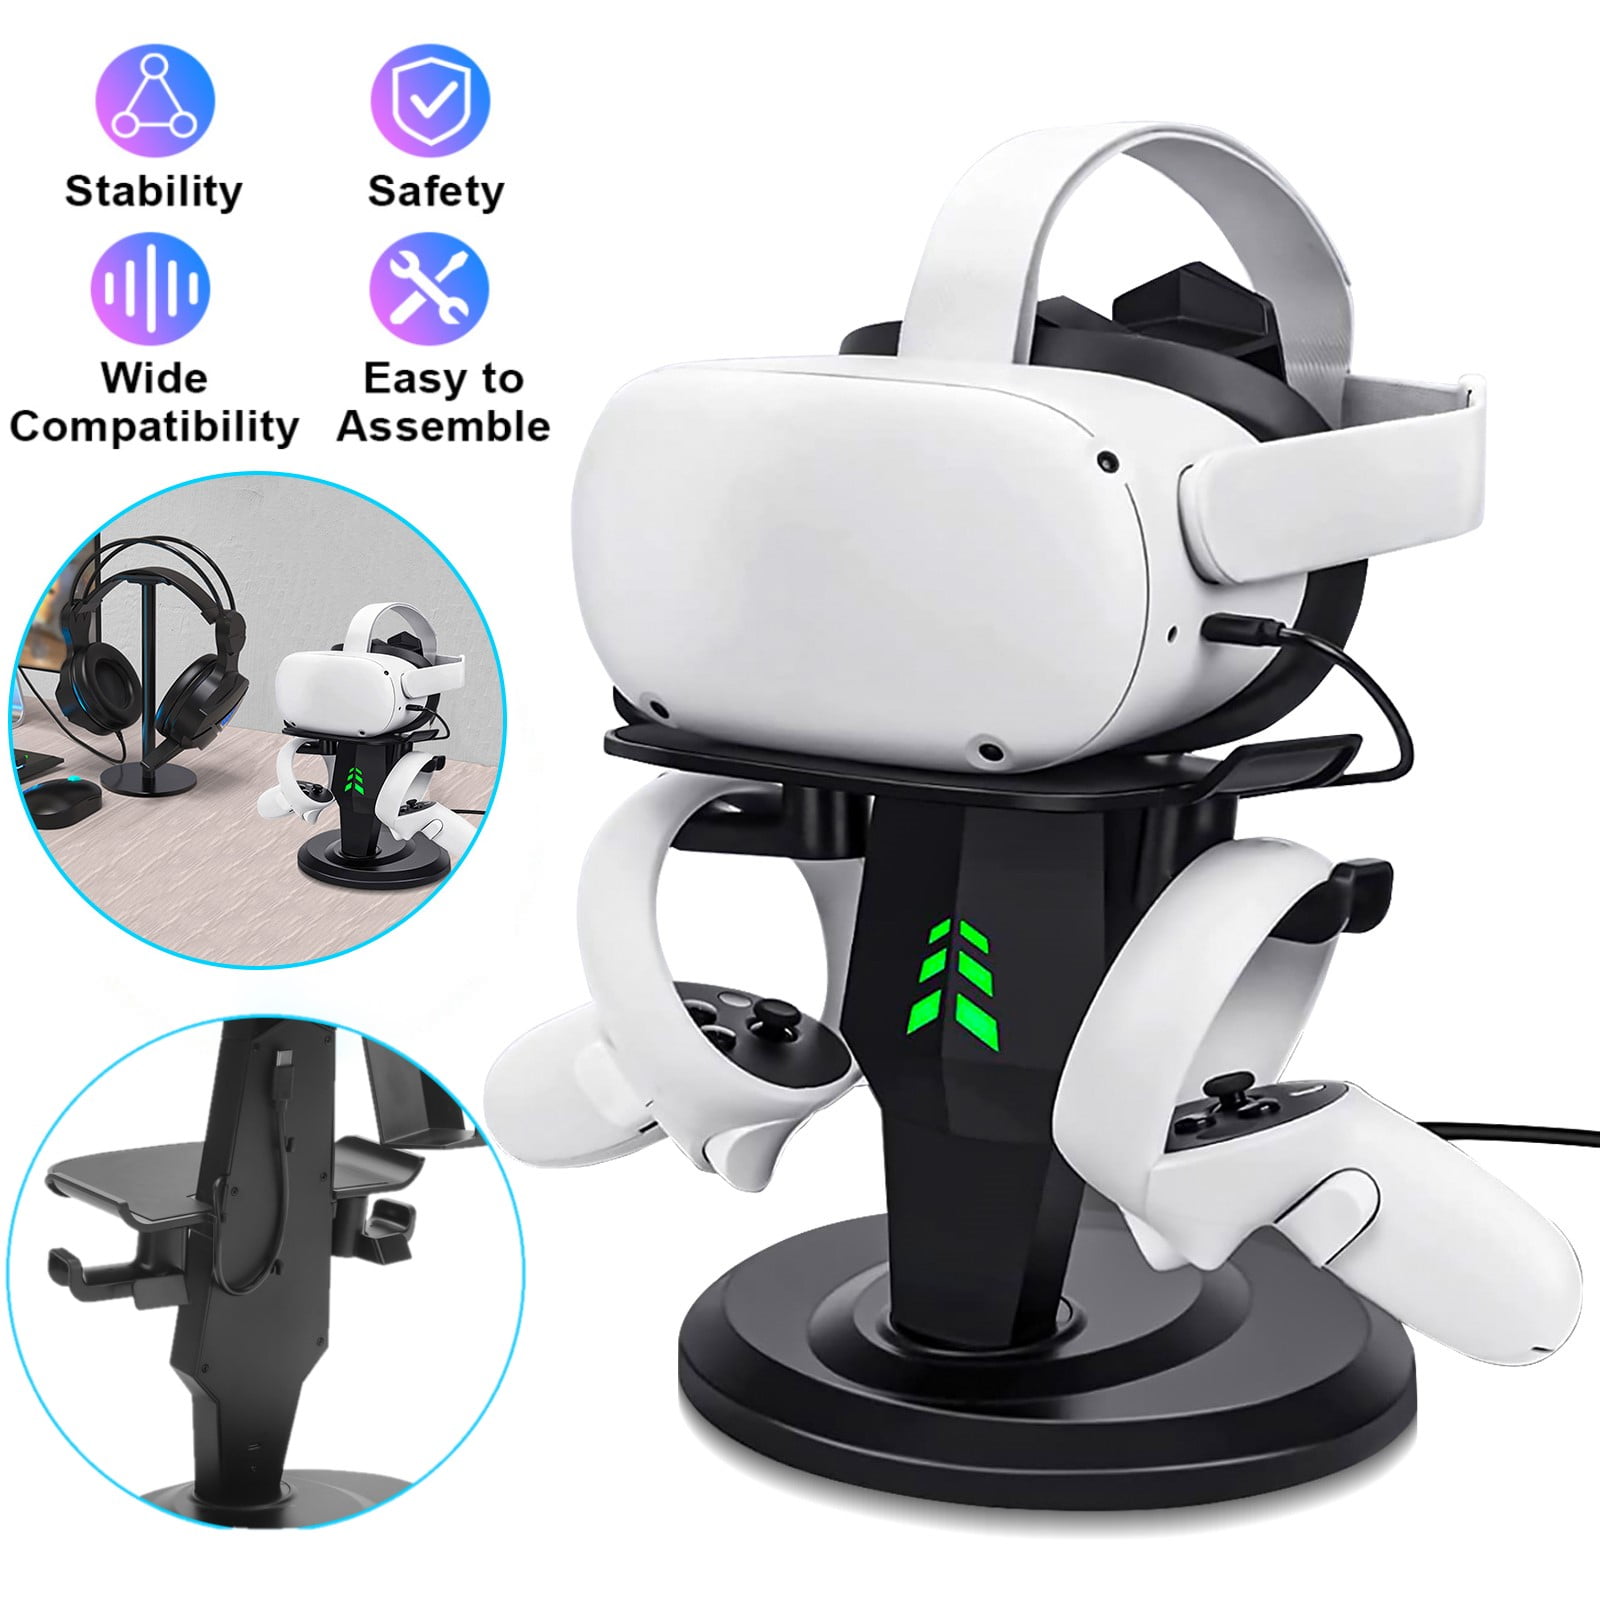 VR Stand, EEEkit VR Headset and Dual Controller Charging Dock Fit for Oculus Quest 2, Rift S, Valve Index, HP Reverb G2, VR Display Stand with LED Indicator - Walmart.com